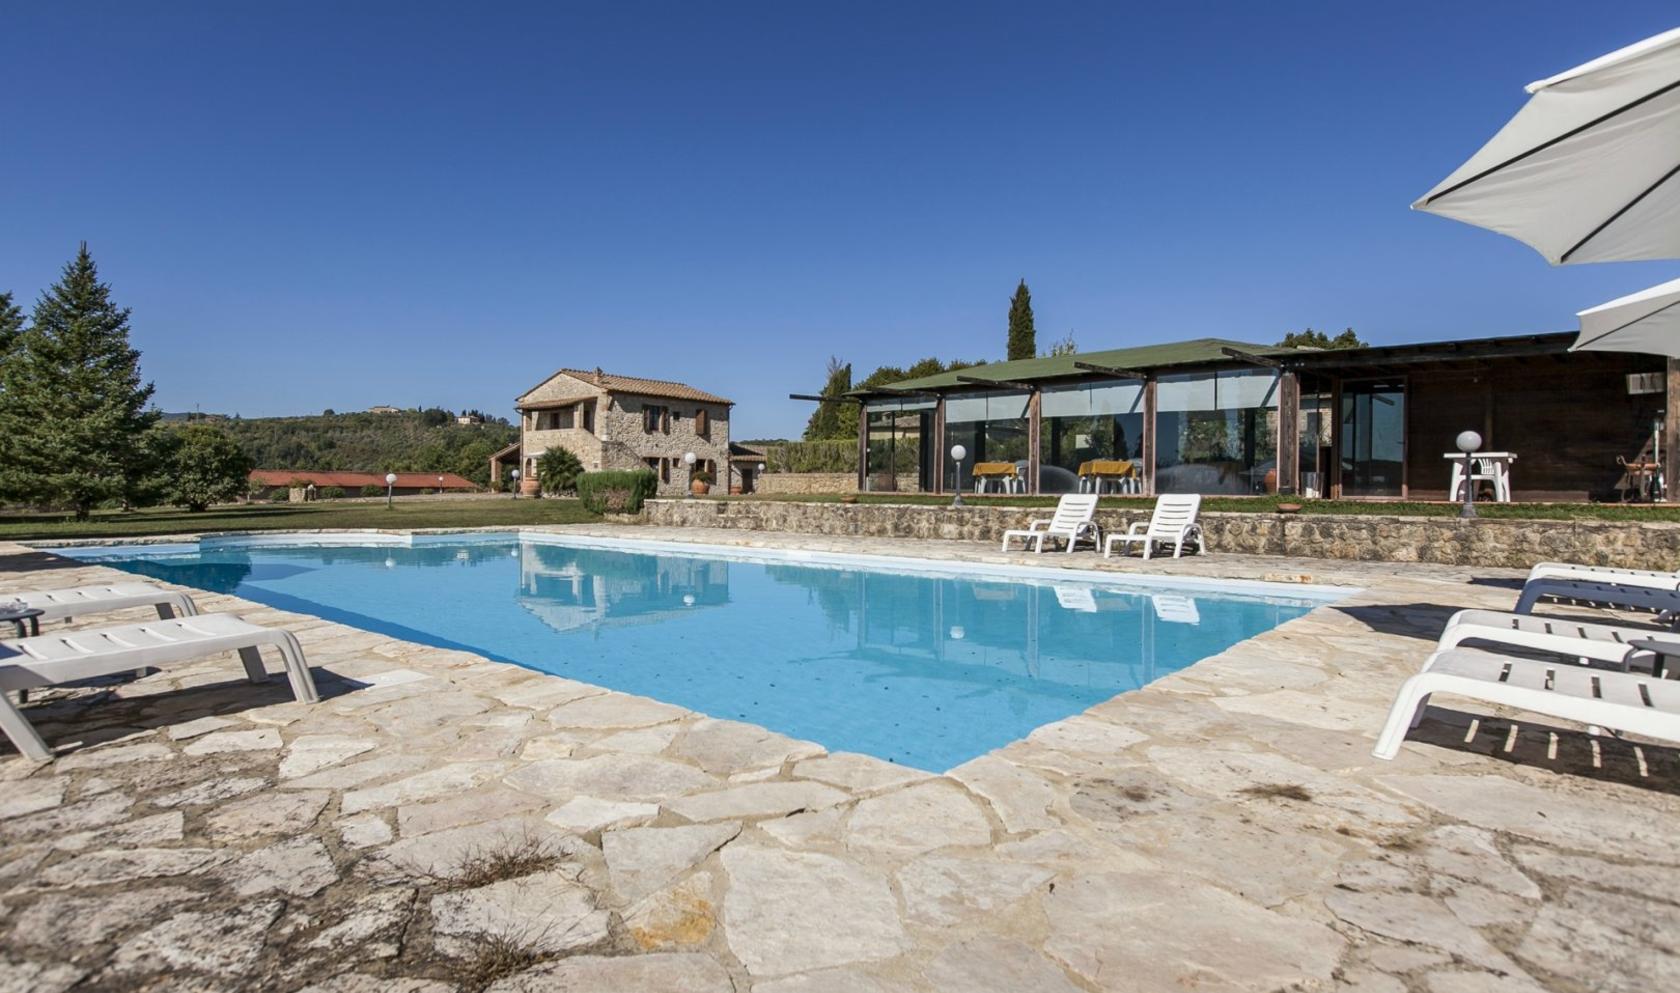 Toscana Immobiliare - The property is located on an area of 30 hectares covered in vineyards, olive groves, forests and arable land with sweeping view. 